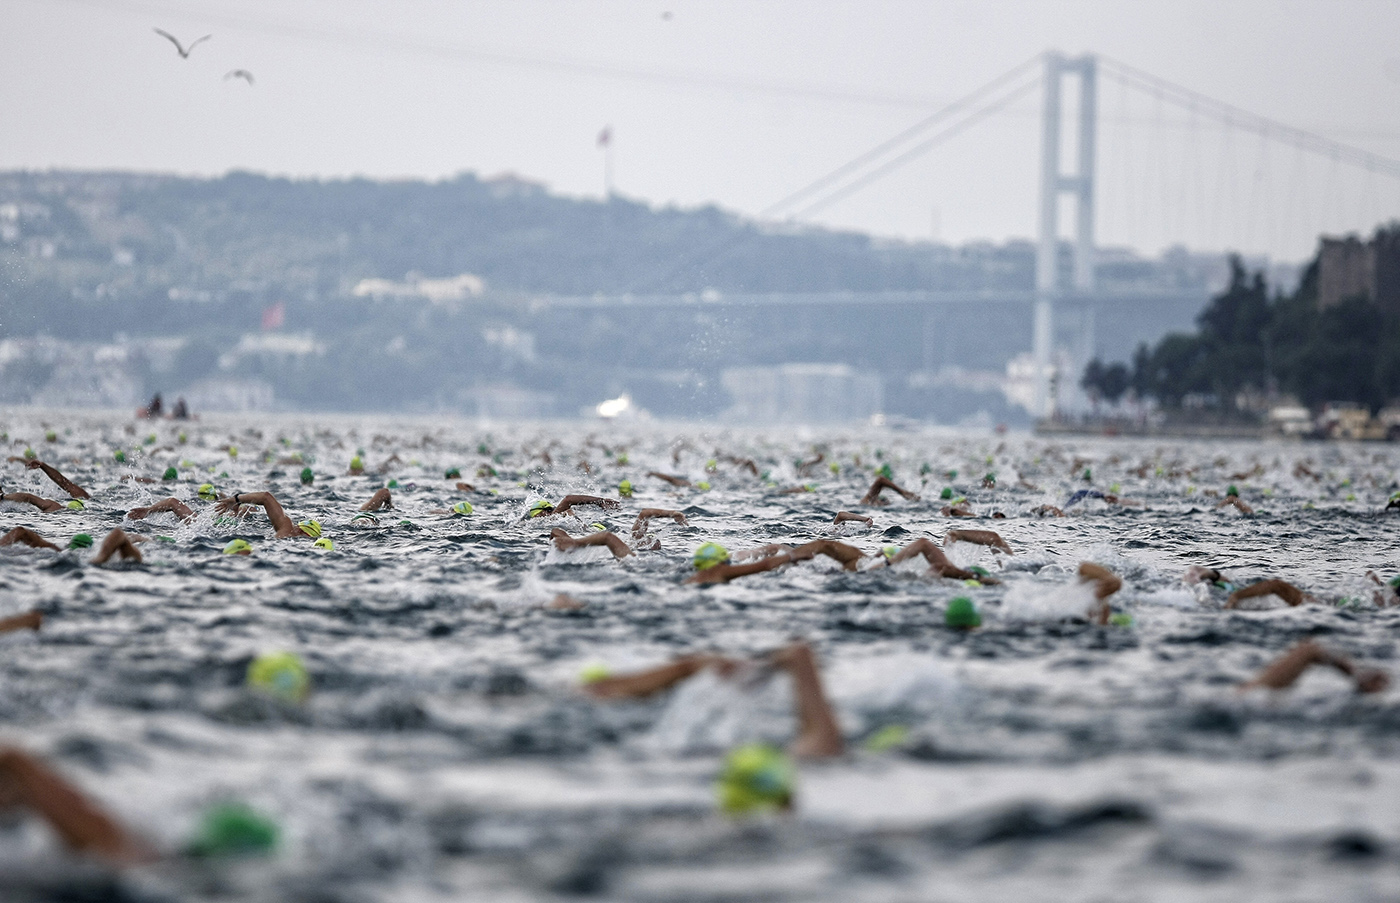 Swimmers participate in the annual Bosphorus Cross-Continental swimming race in Istanbul, Turkey, 23 July 2015. 